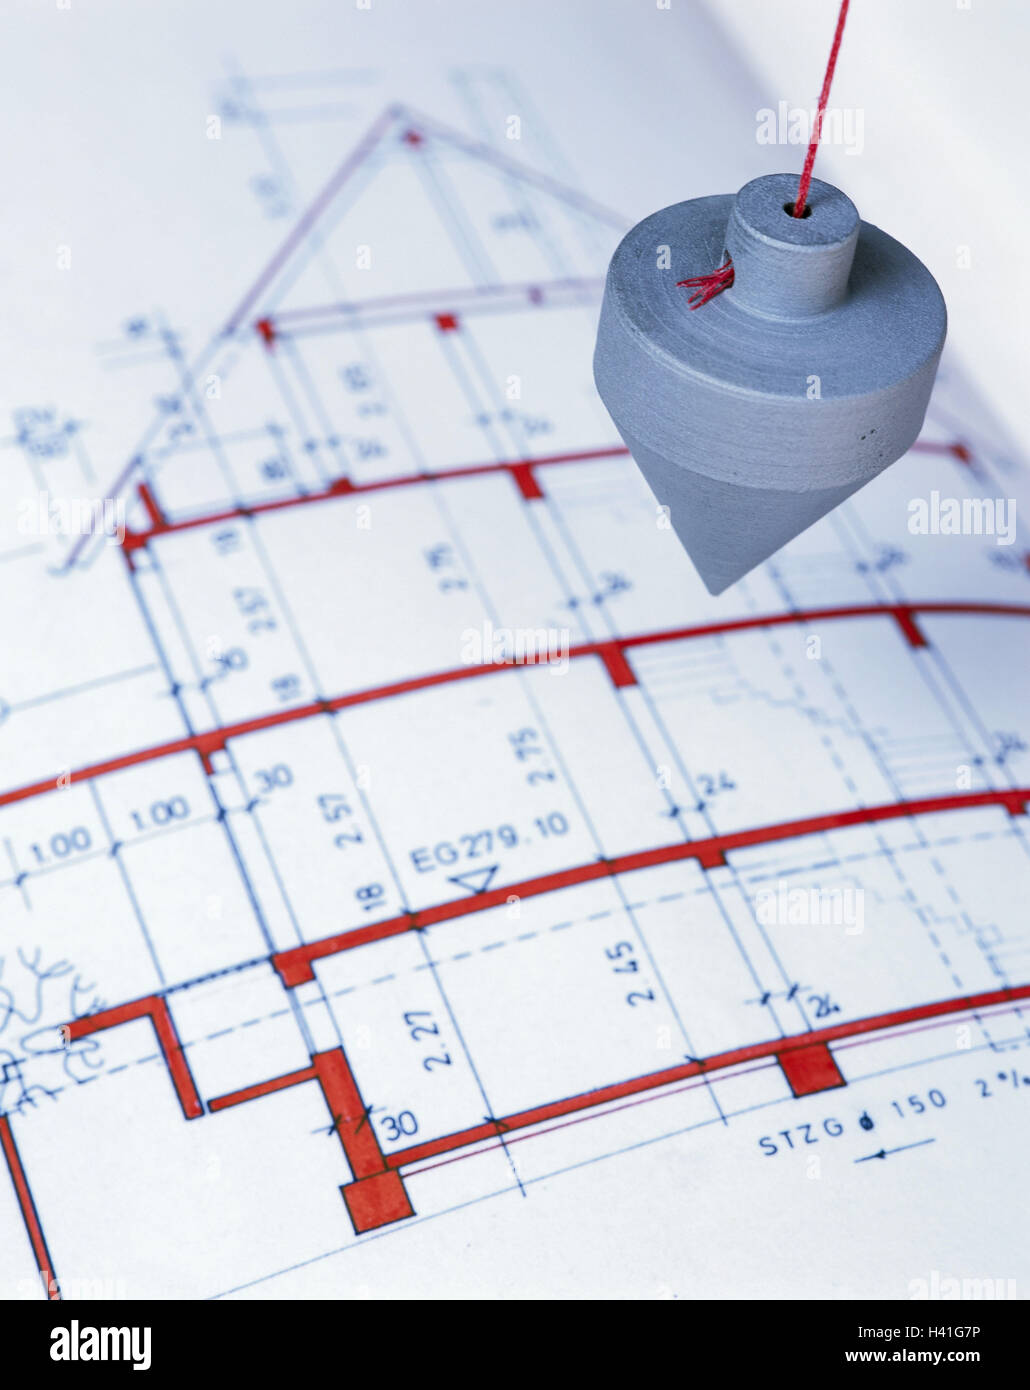 Architect's plan, plumb line, building of a house, house, own home, construction, planning, plan, drawing, civil engineering, subscription, mass, statics, build, metrology, tools, plumb, perpendicular, work, occupation, building industry, Still life, prod Stock Photo